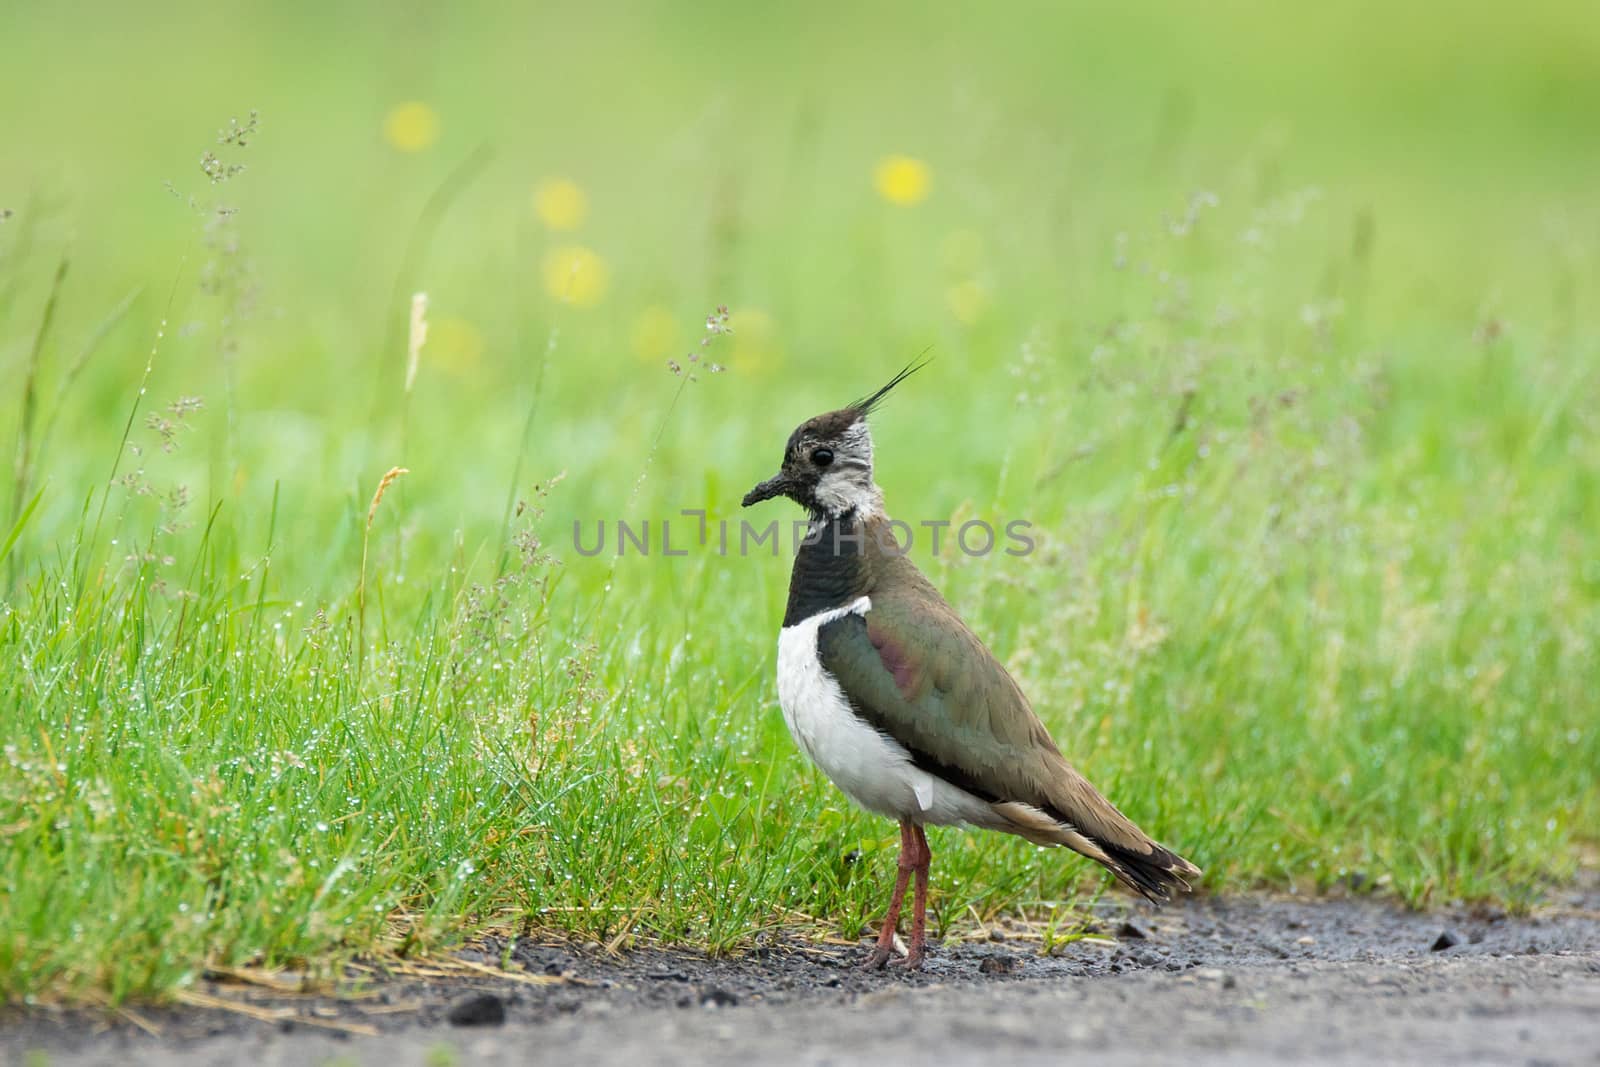  lapwing on the grass by AlexBush